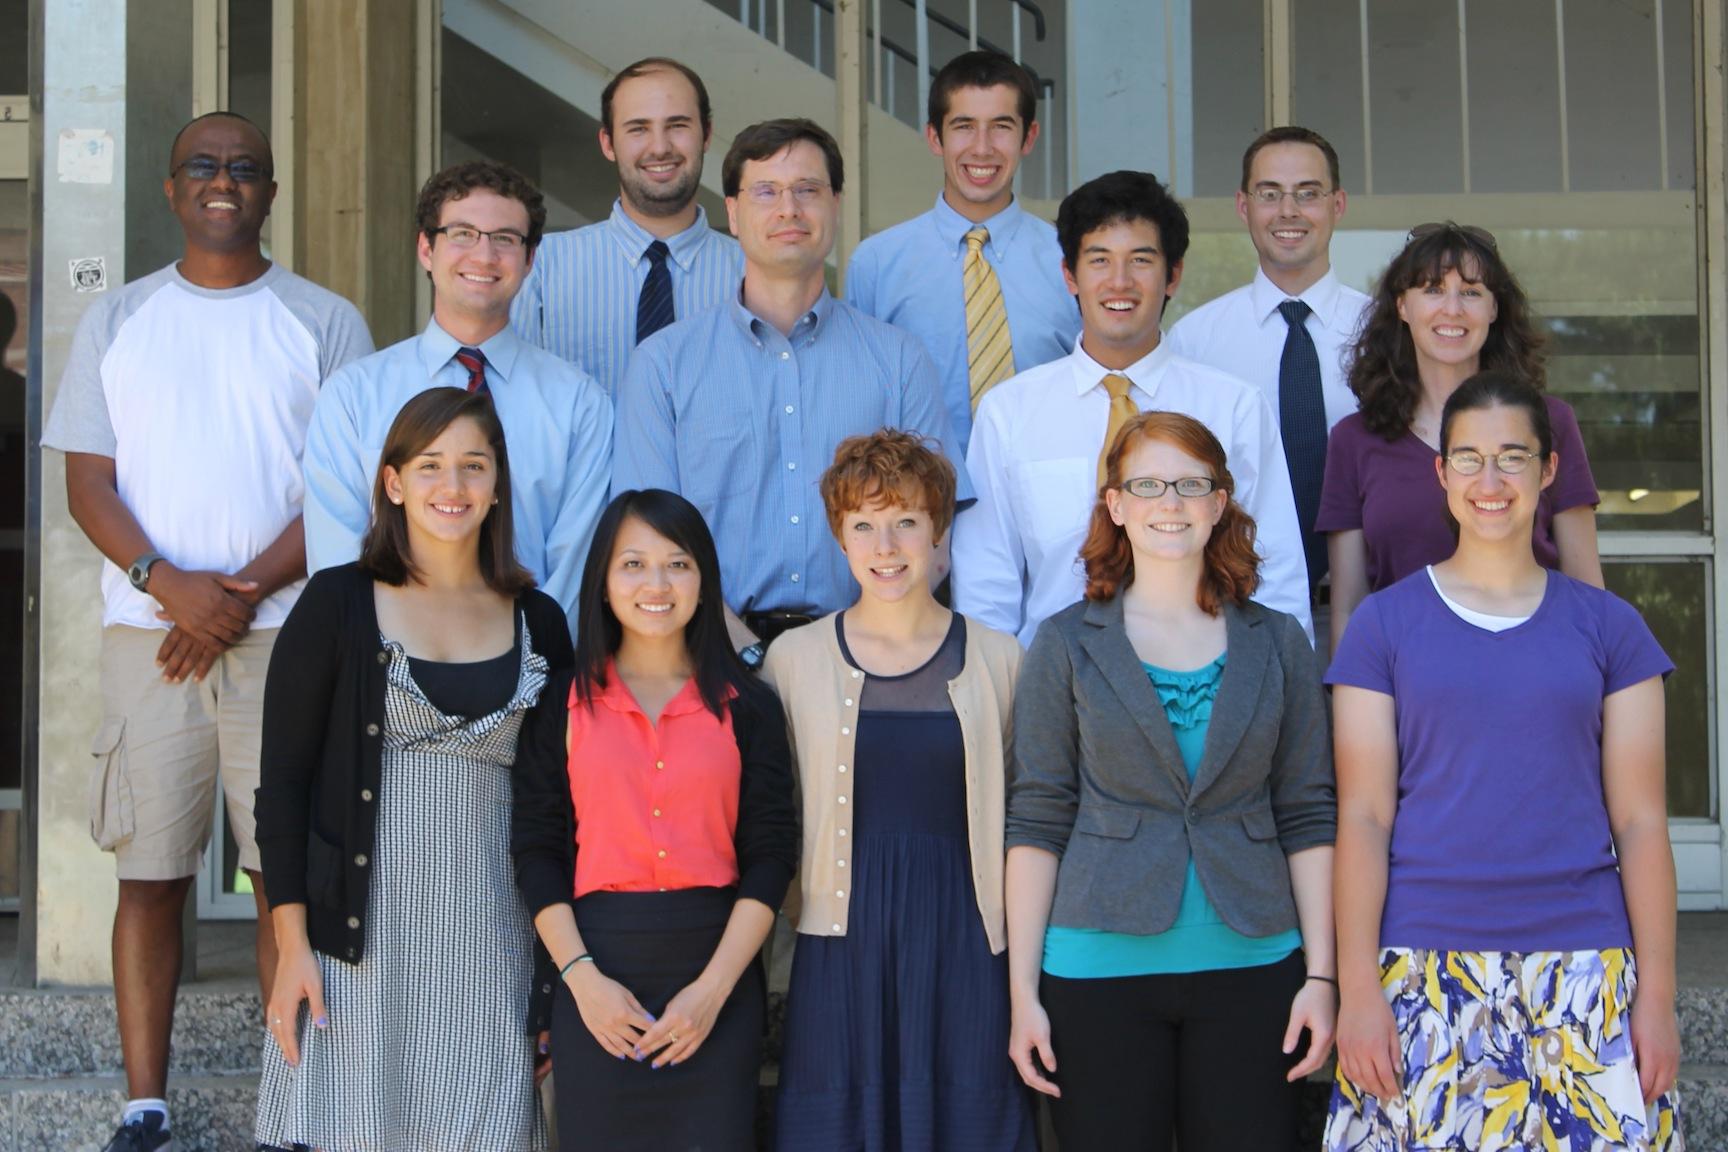 The 2012 REU group at the SUMMR conference at Michigan State University